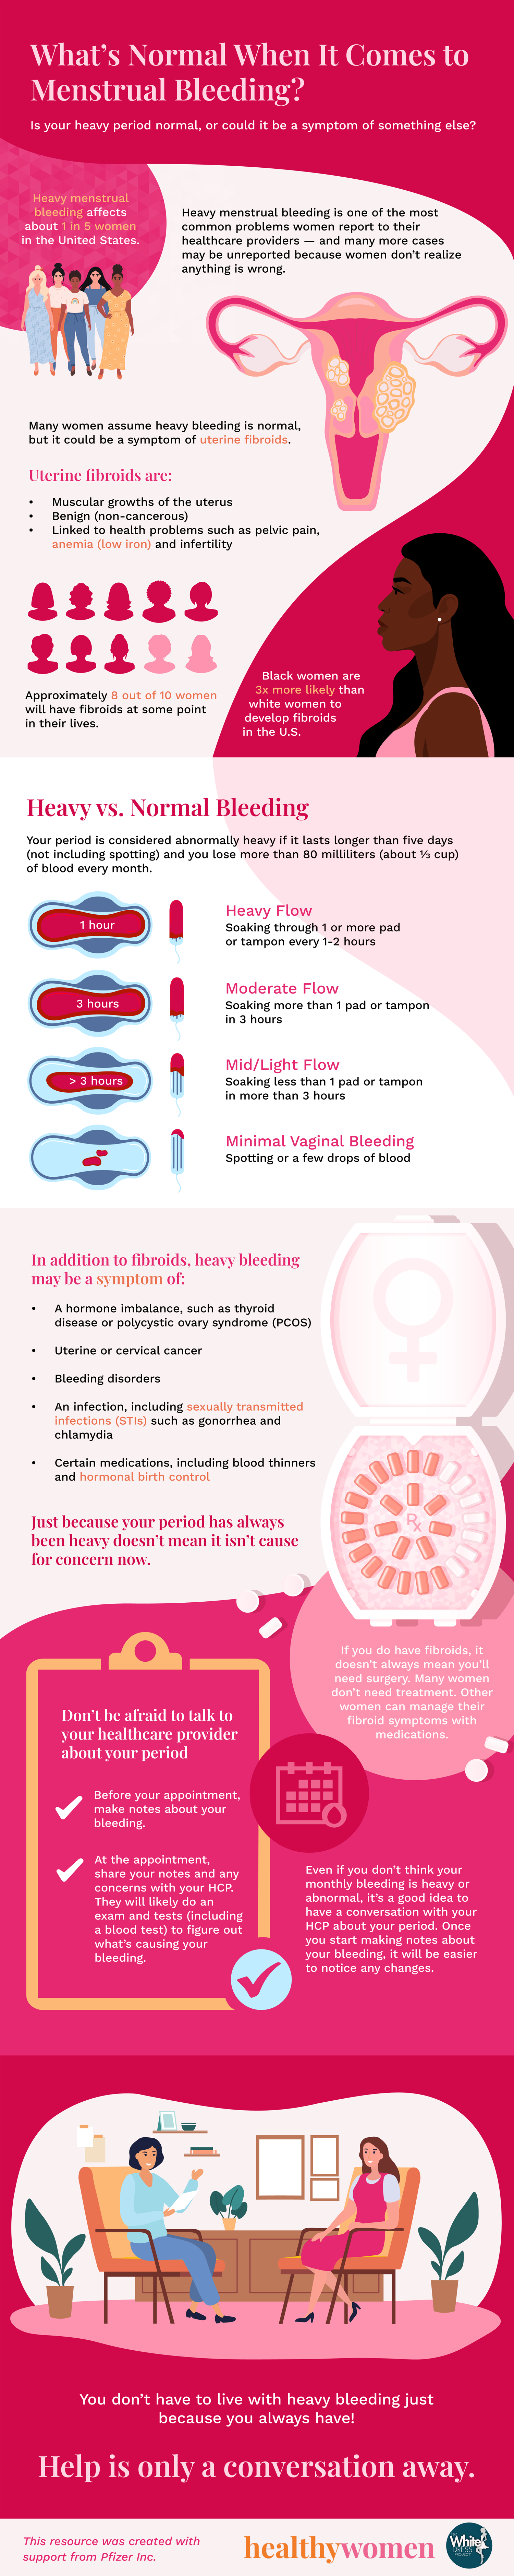 Infographic Whatu2019s Normal When It Comes to Menstrual Bleeding? Click the image to open the PDF